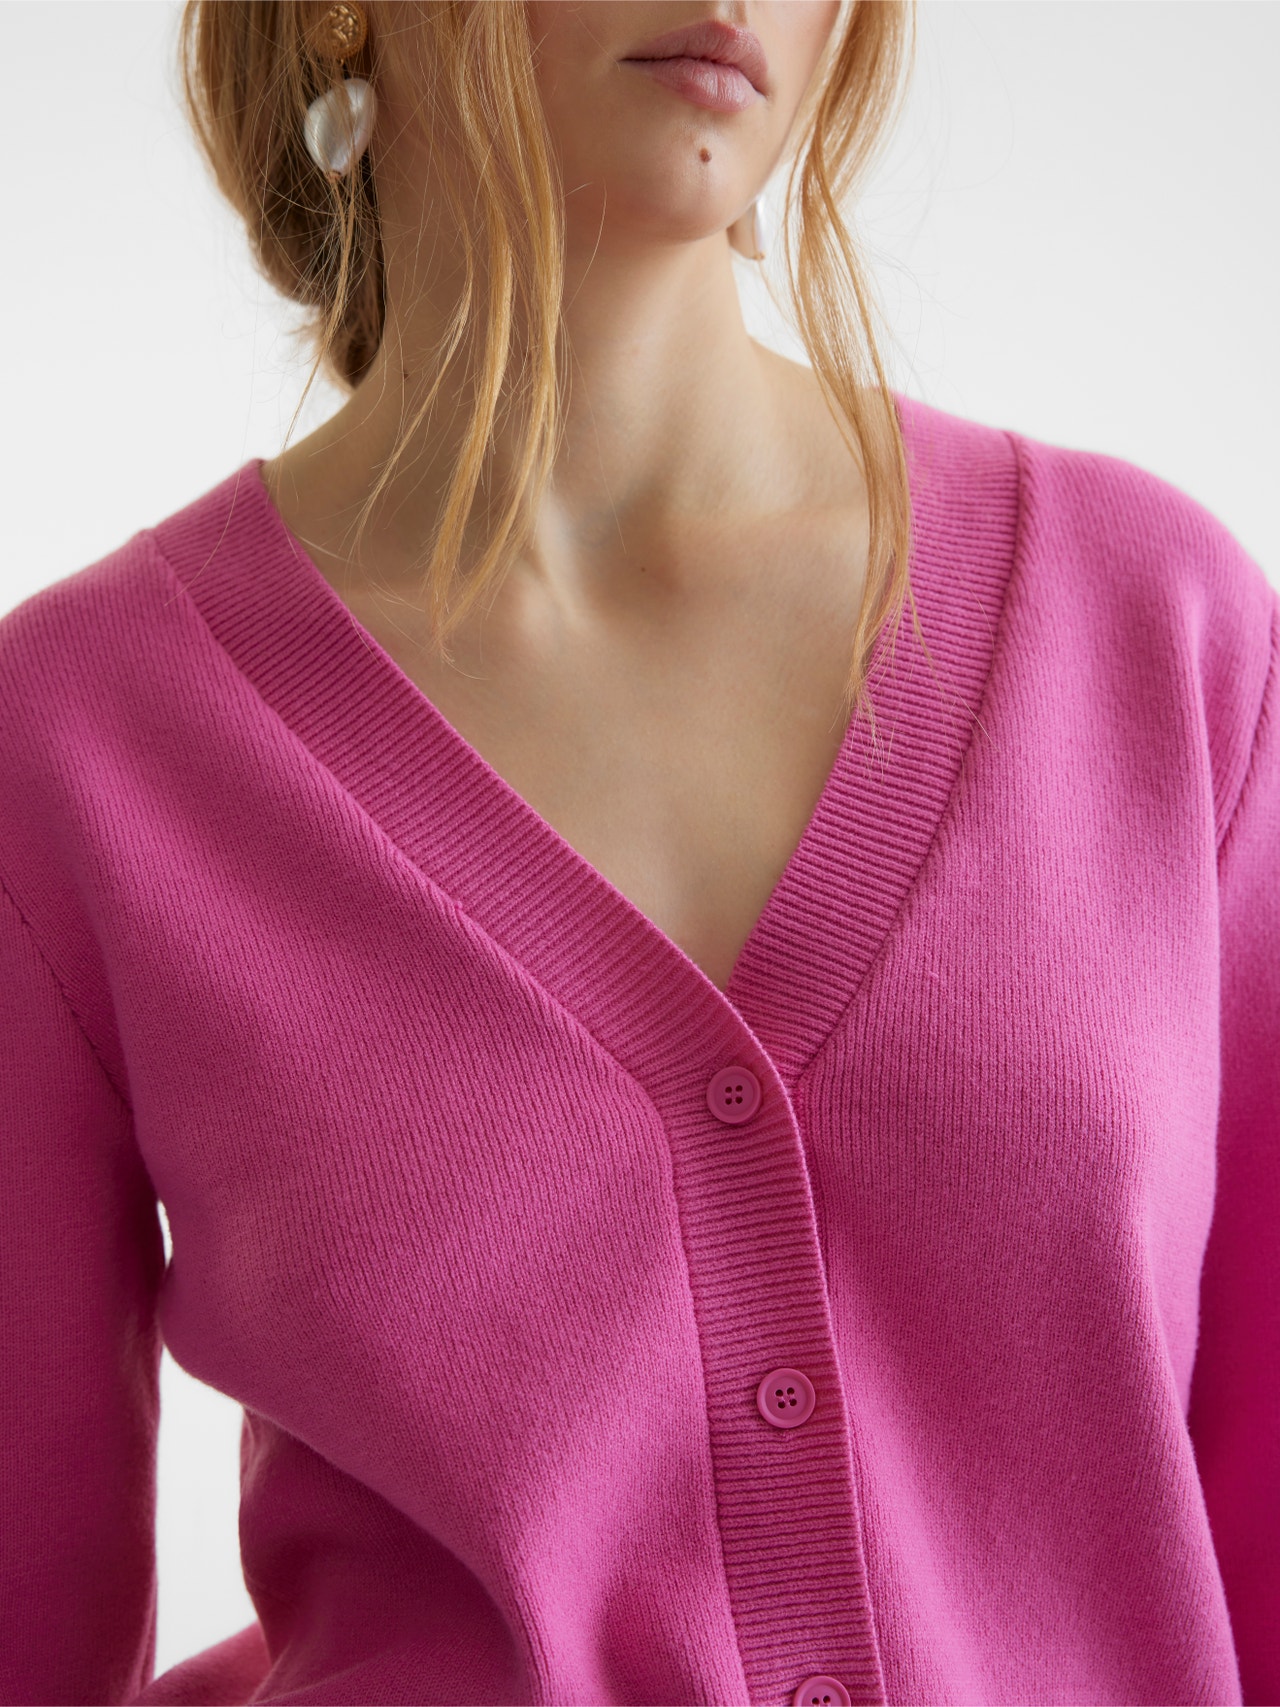 Vero Moda SOMETHING NEW PROJECT; CHLOE FRATER  Knit Cardigan -Super Pink - 10301618